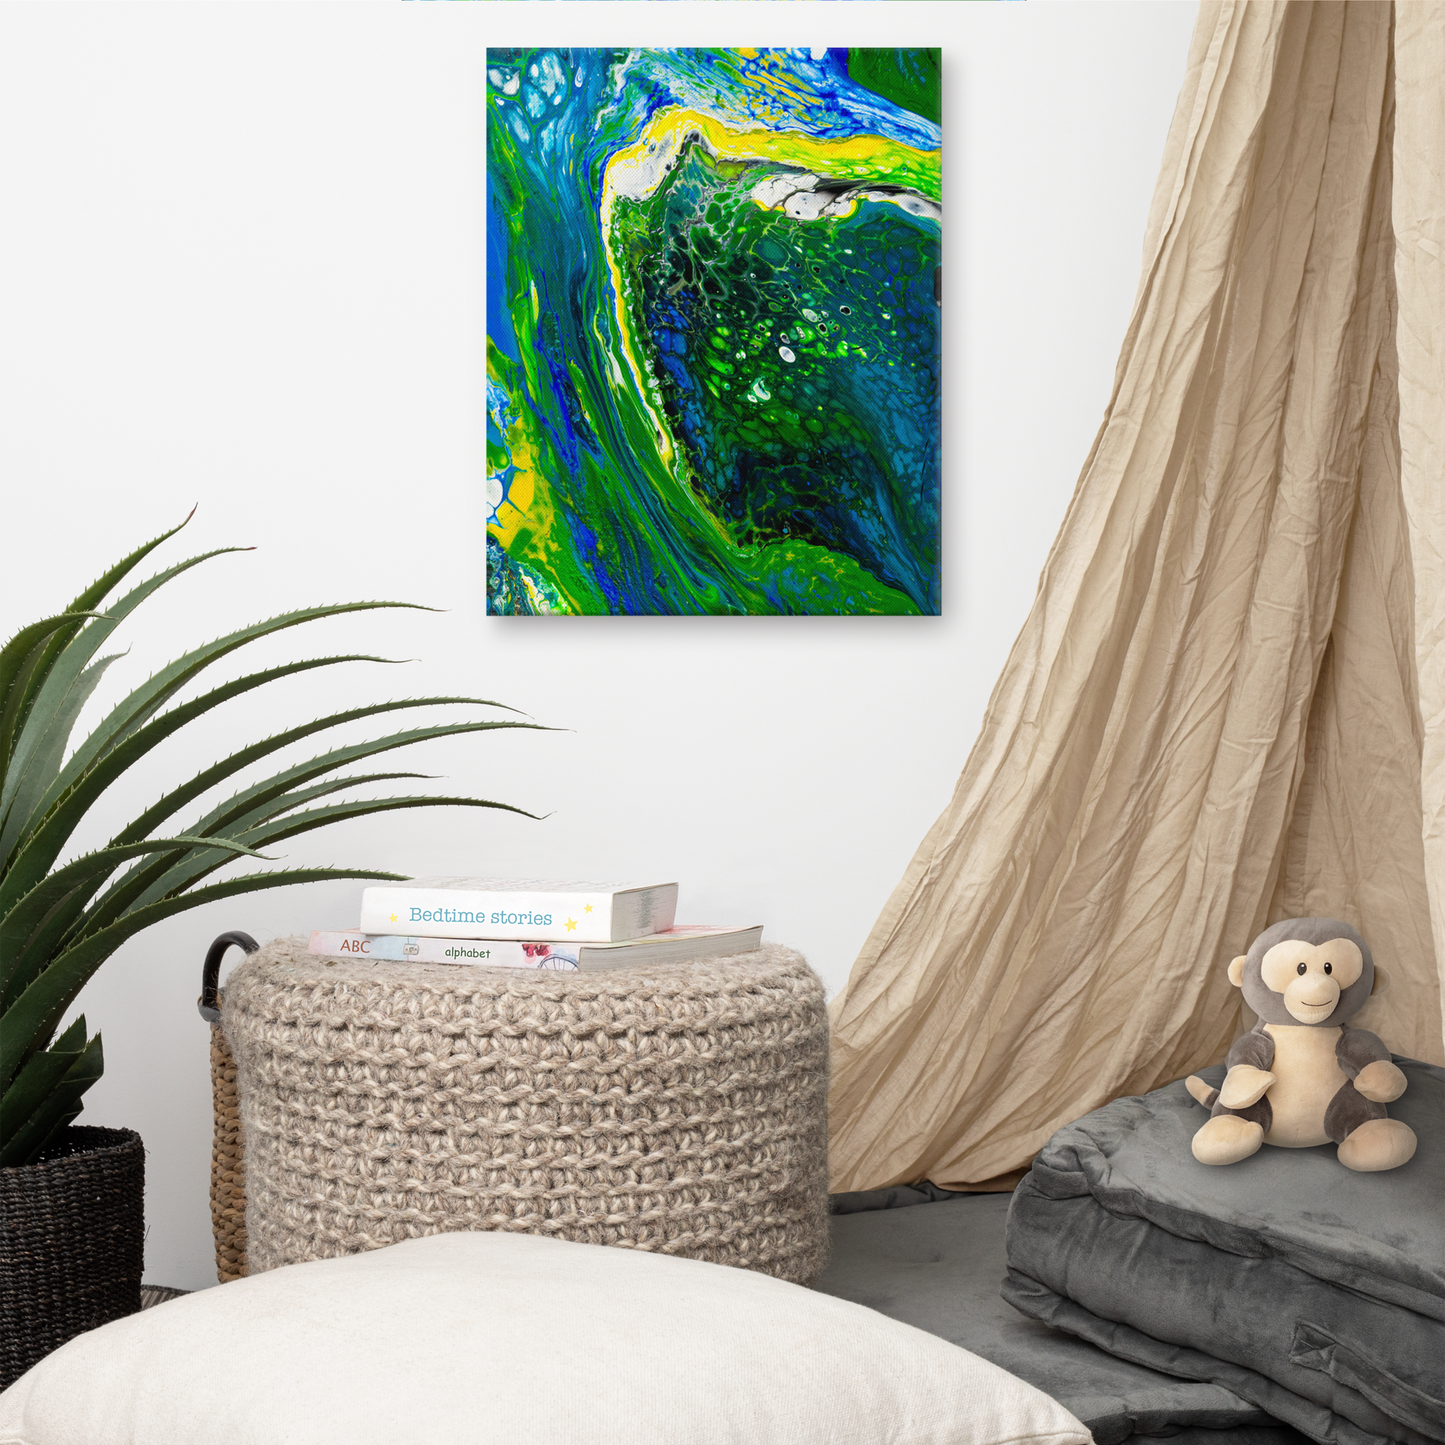 NightOwl Studio Abstract Wall Art, Green Stream, Boho Living Room, Bedroom, Office, and Home Decor, Premium Canvas with Wooden Frame, Acrylic Painting Reproduction, 16” x 20”